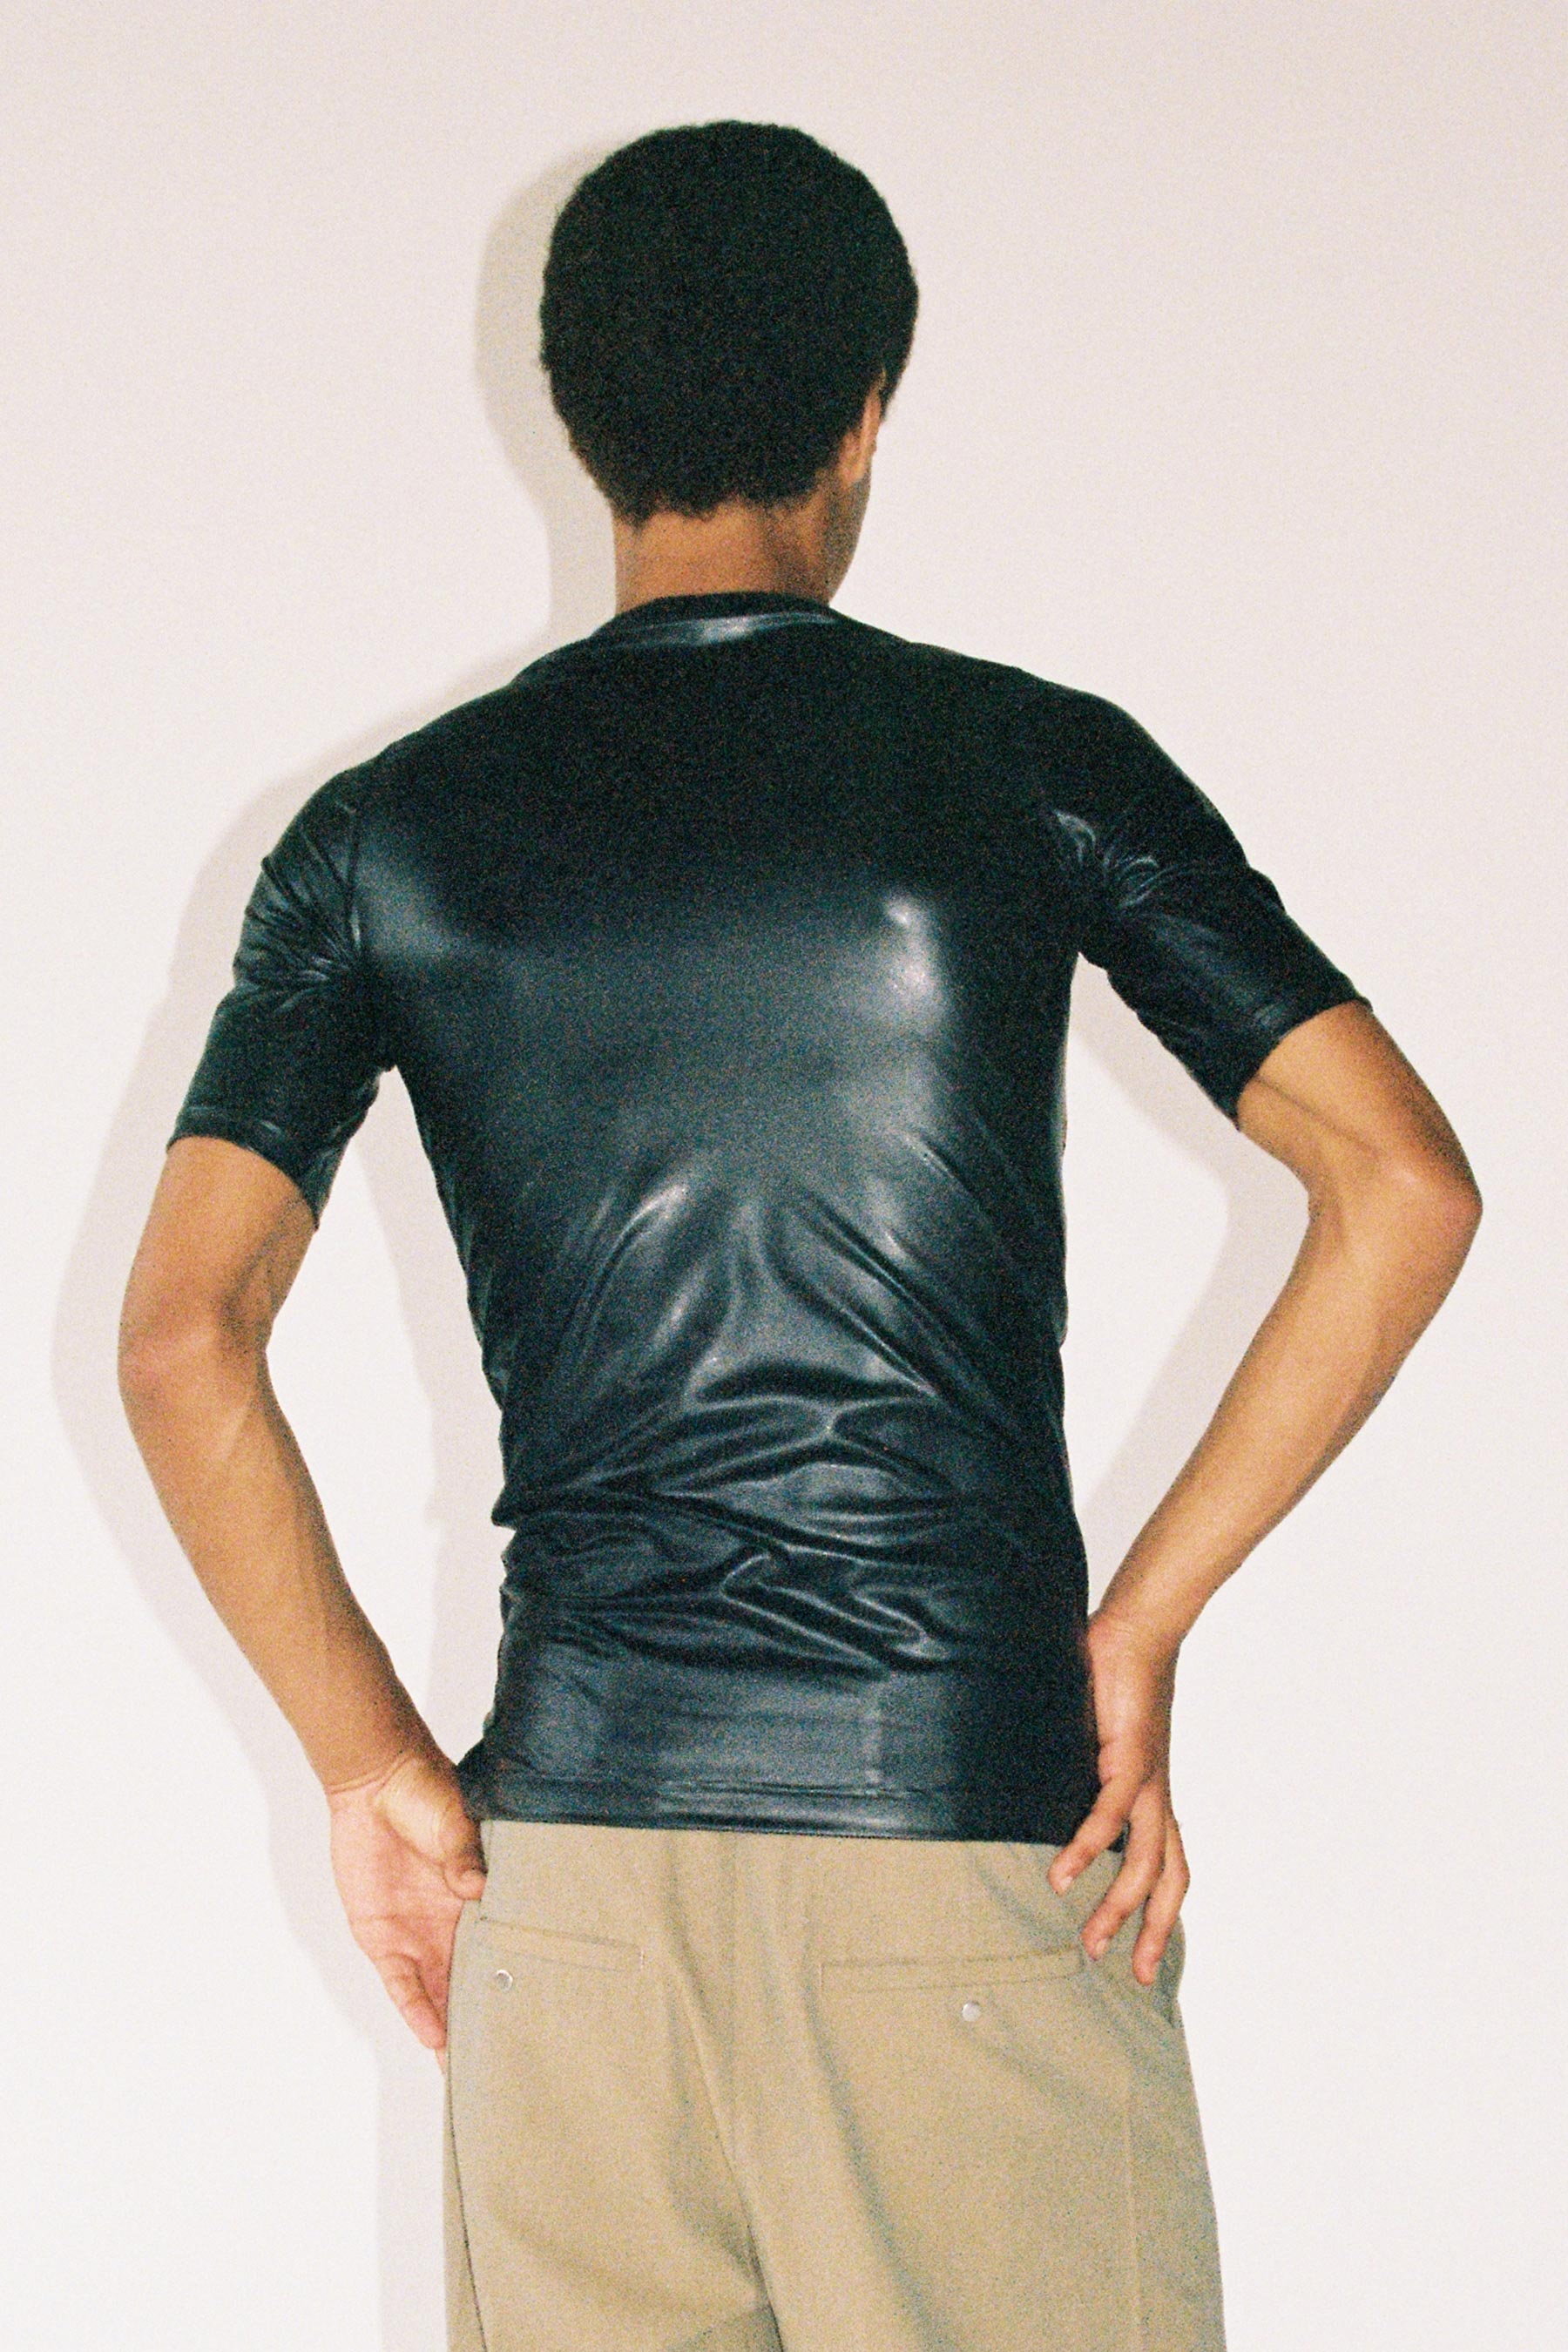 Black Second Skin Polyamide Faux Leather Short Sleeve Body Tight